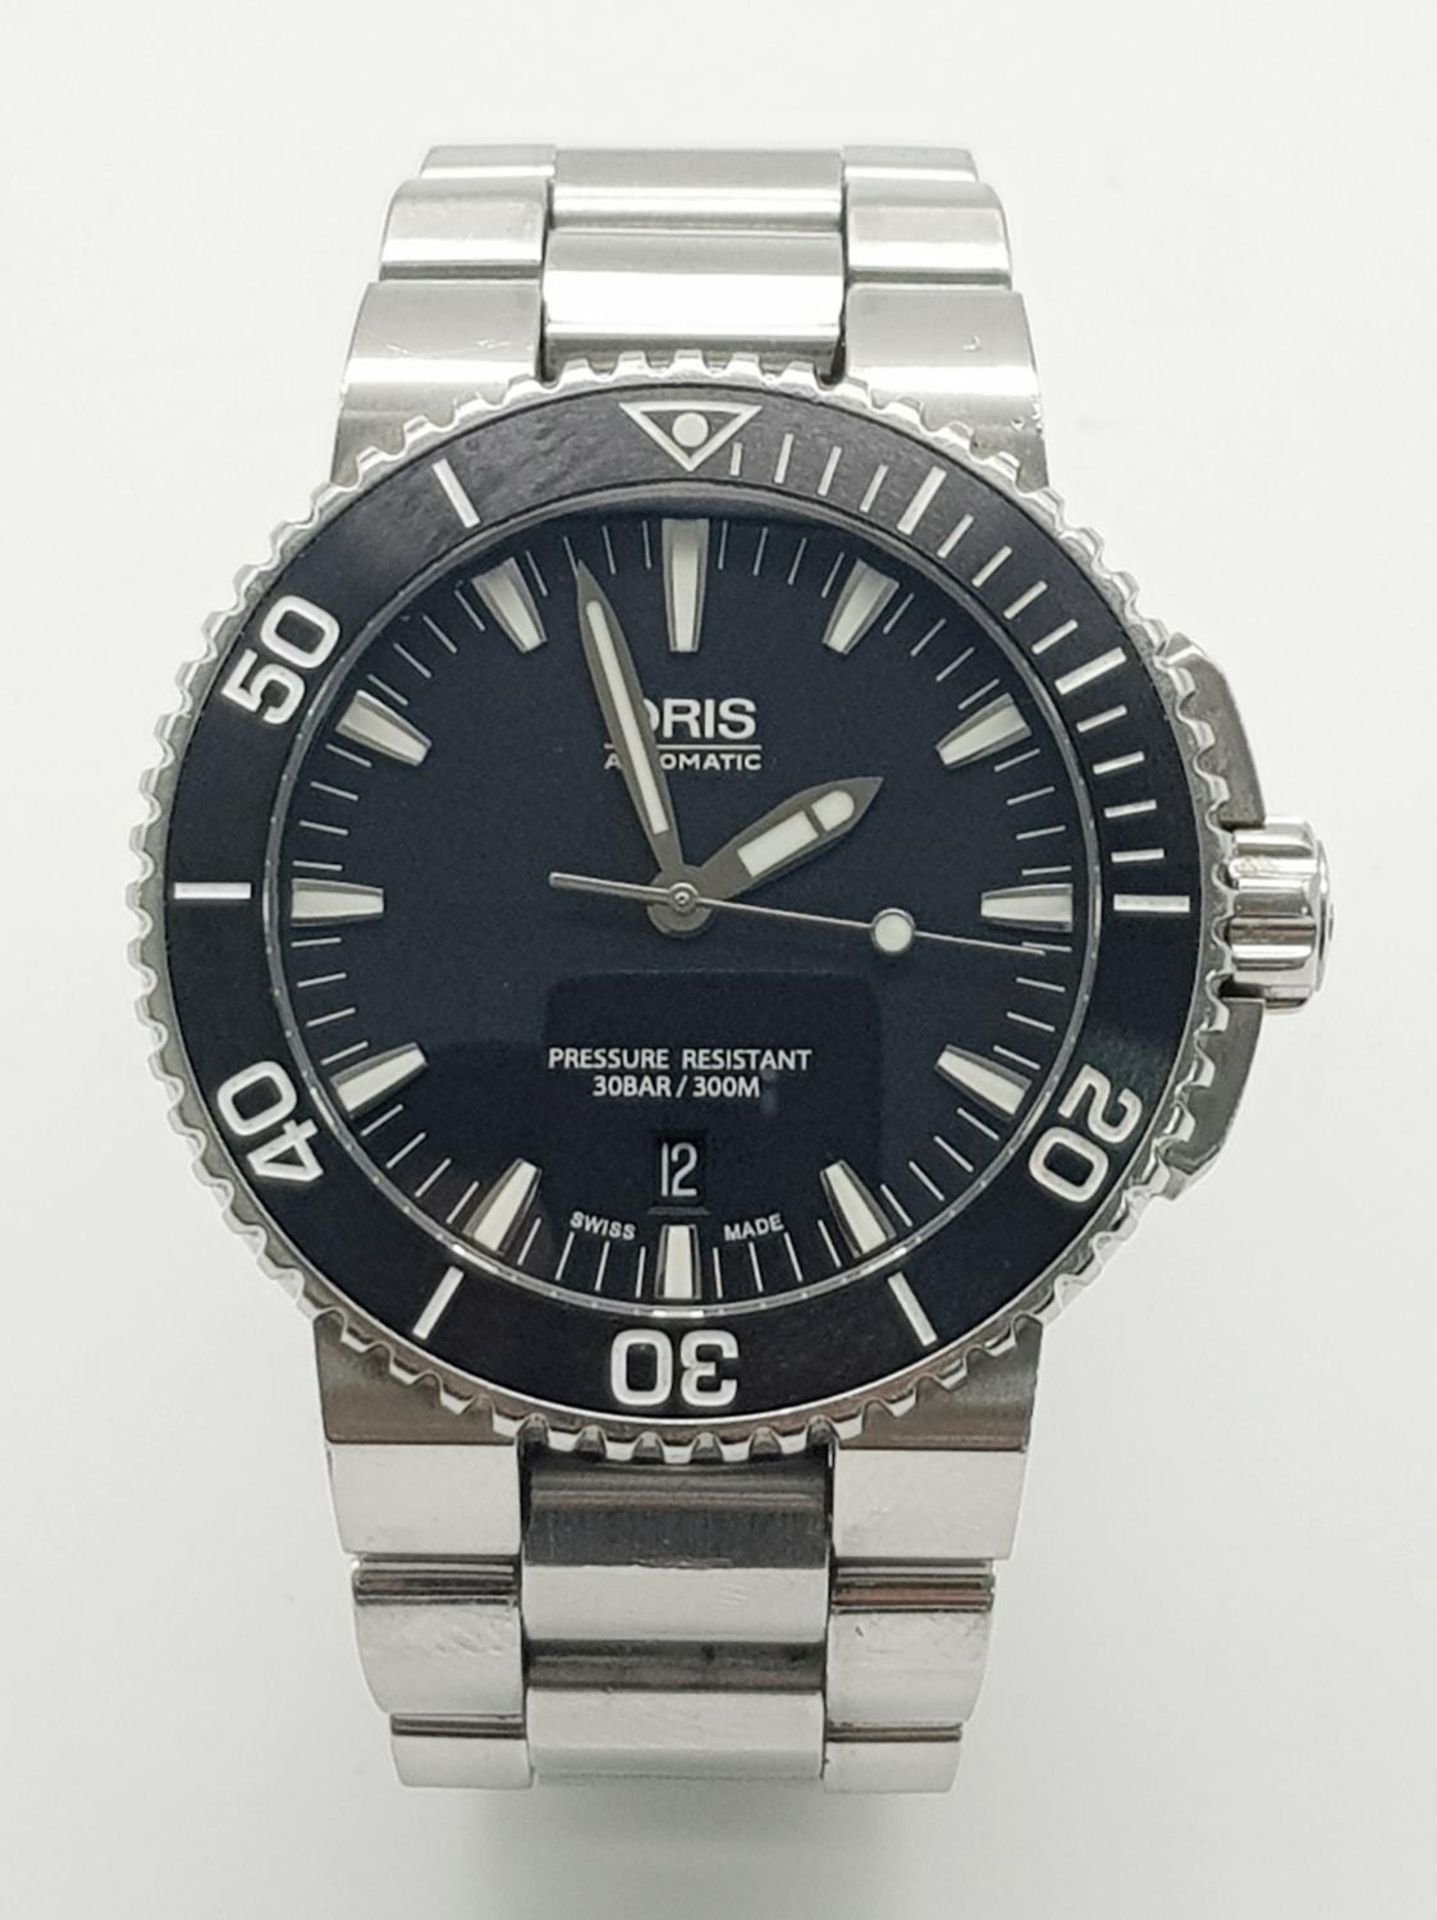 An Oris Automatic Divers Watch. Pressure resistant to 300M - Model 7653. Stainless steel bracelet - Image 2 of 8